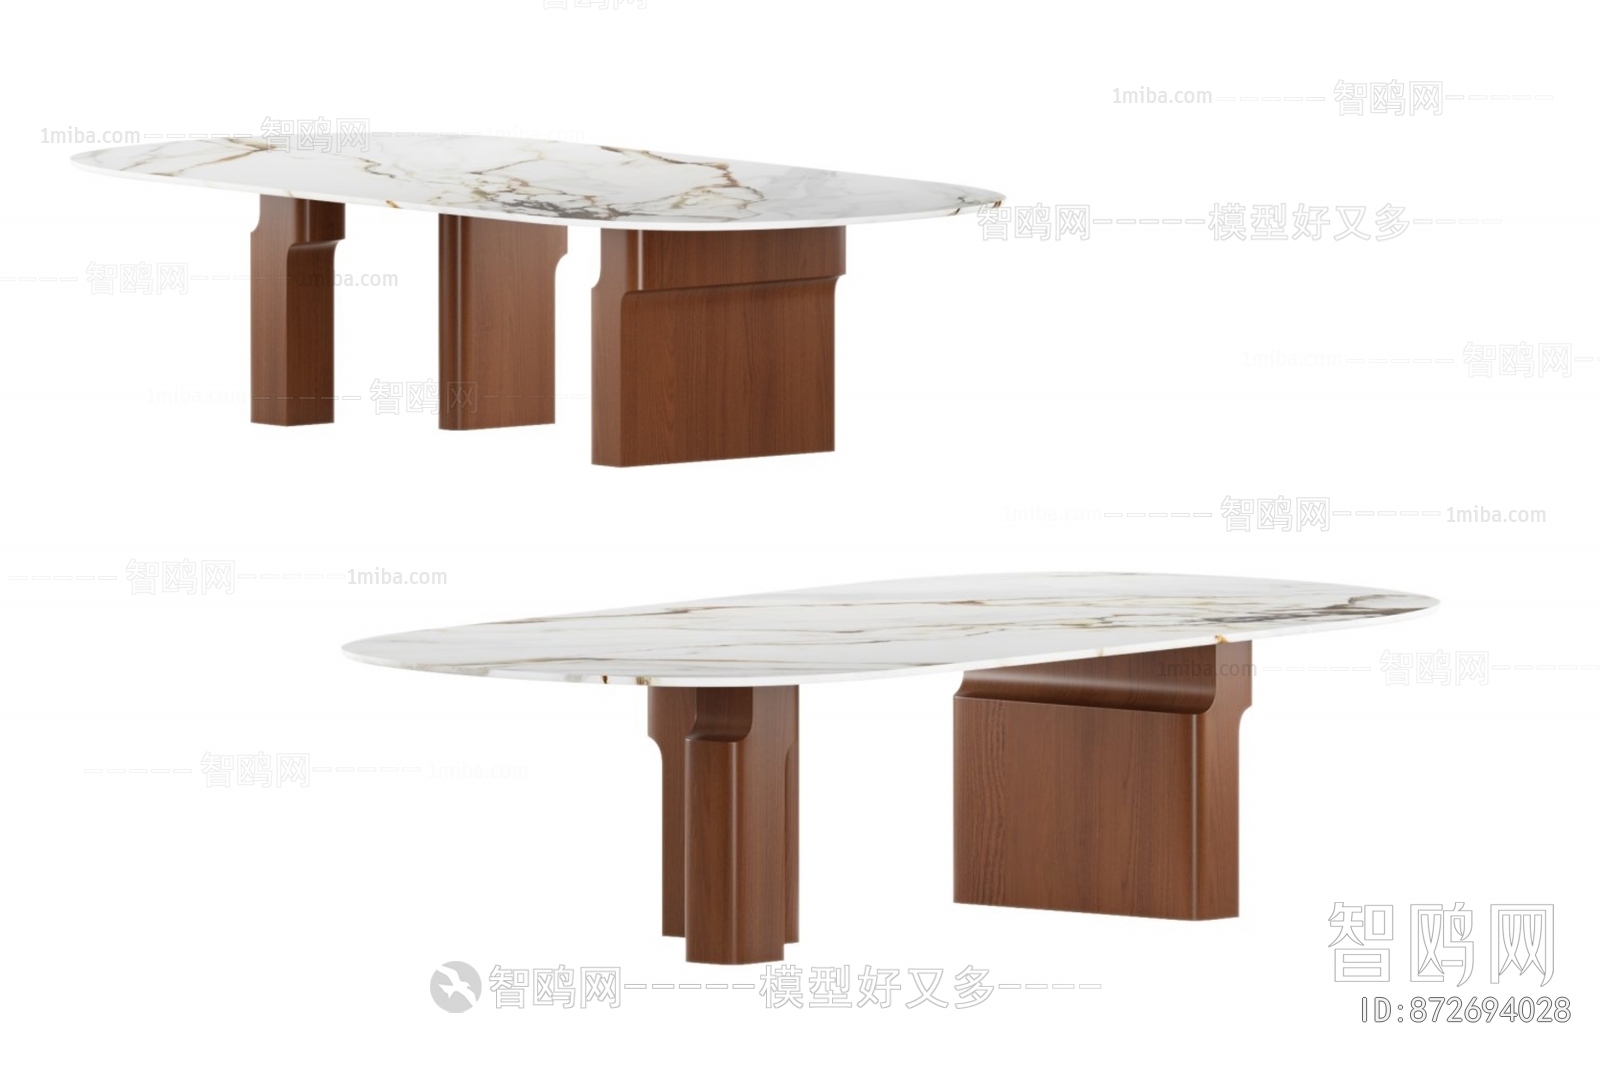 Modern Nordic Style Dining Table